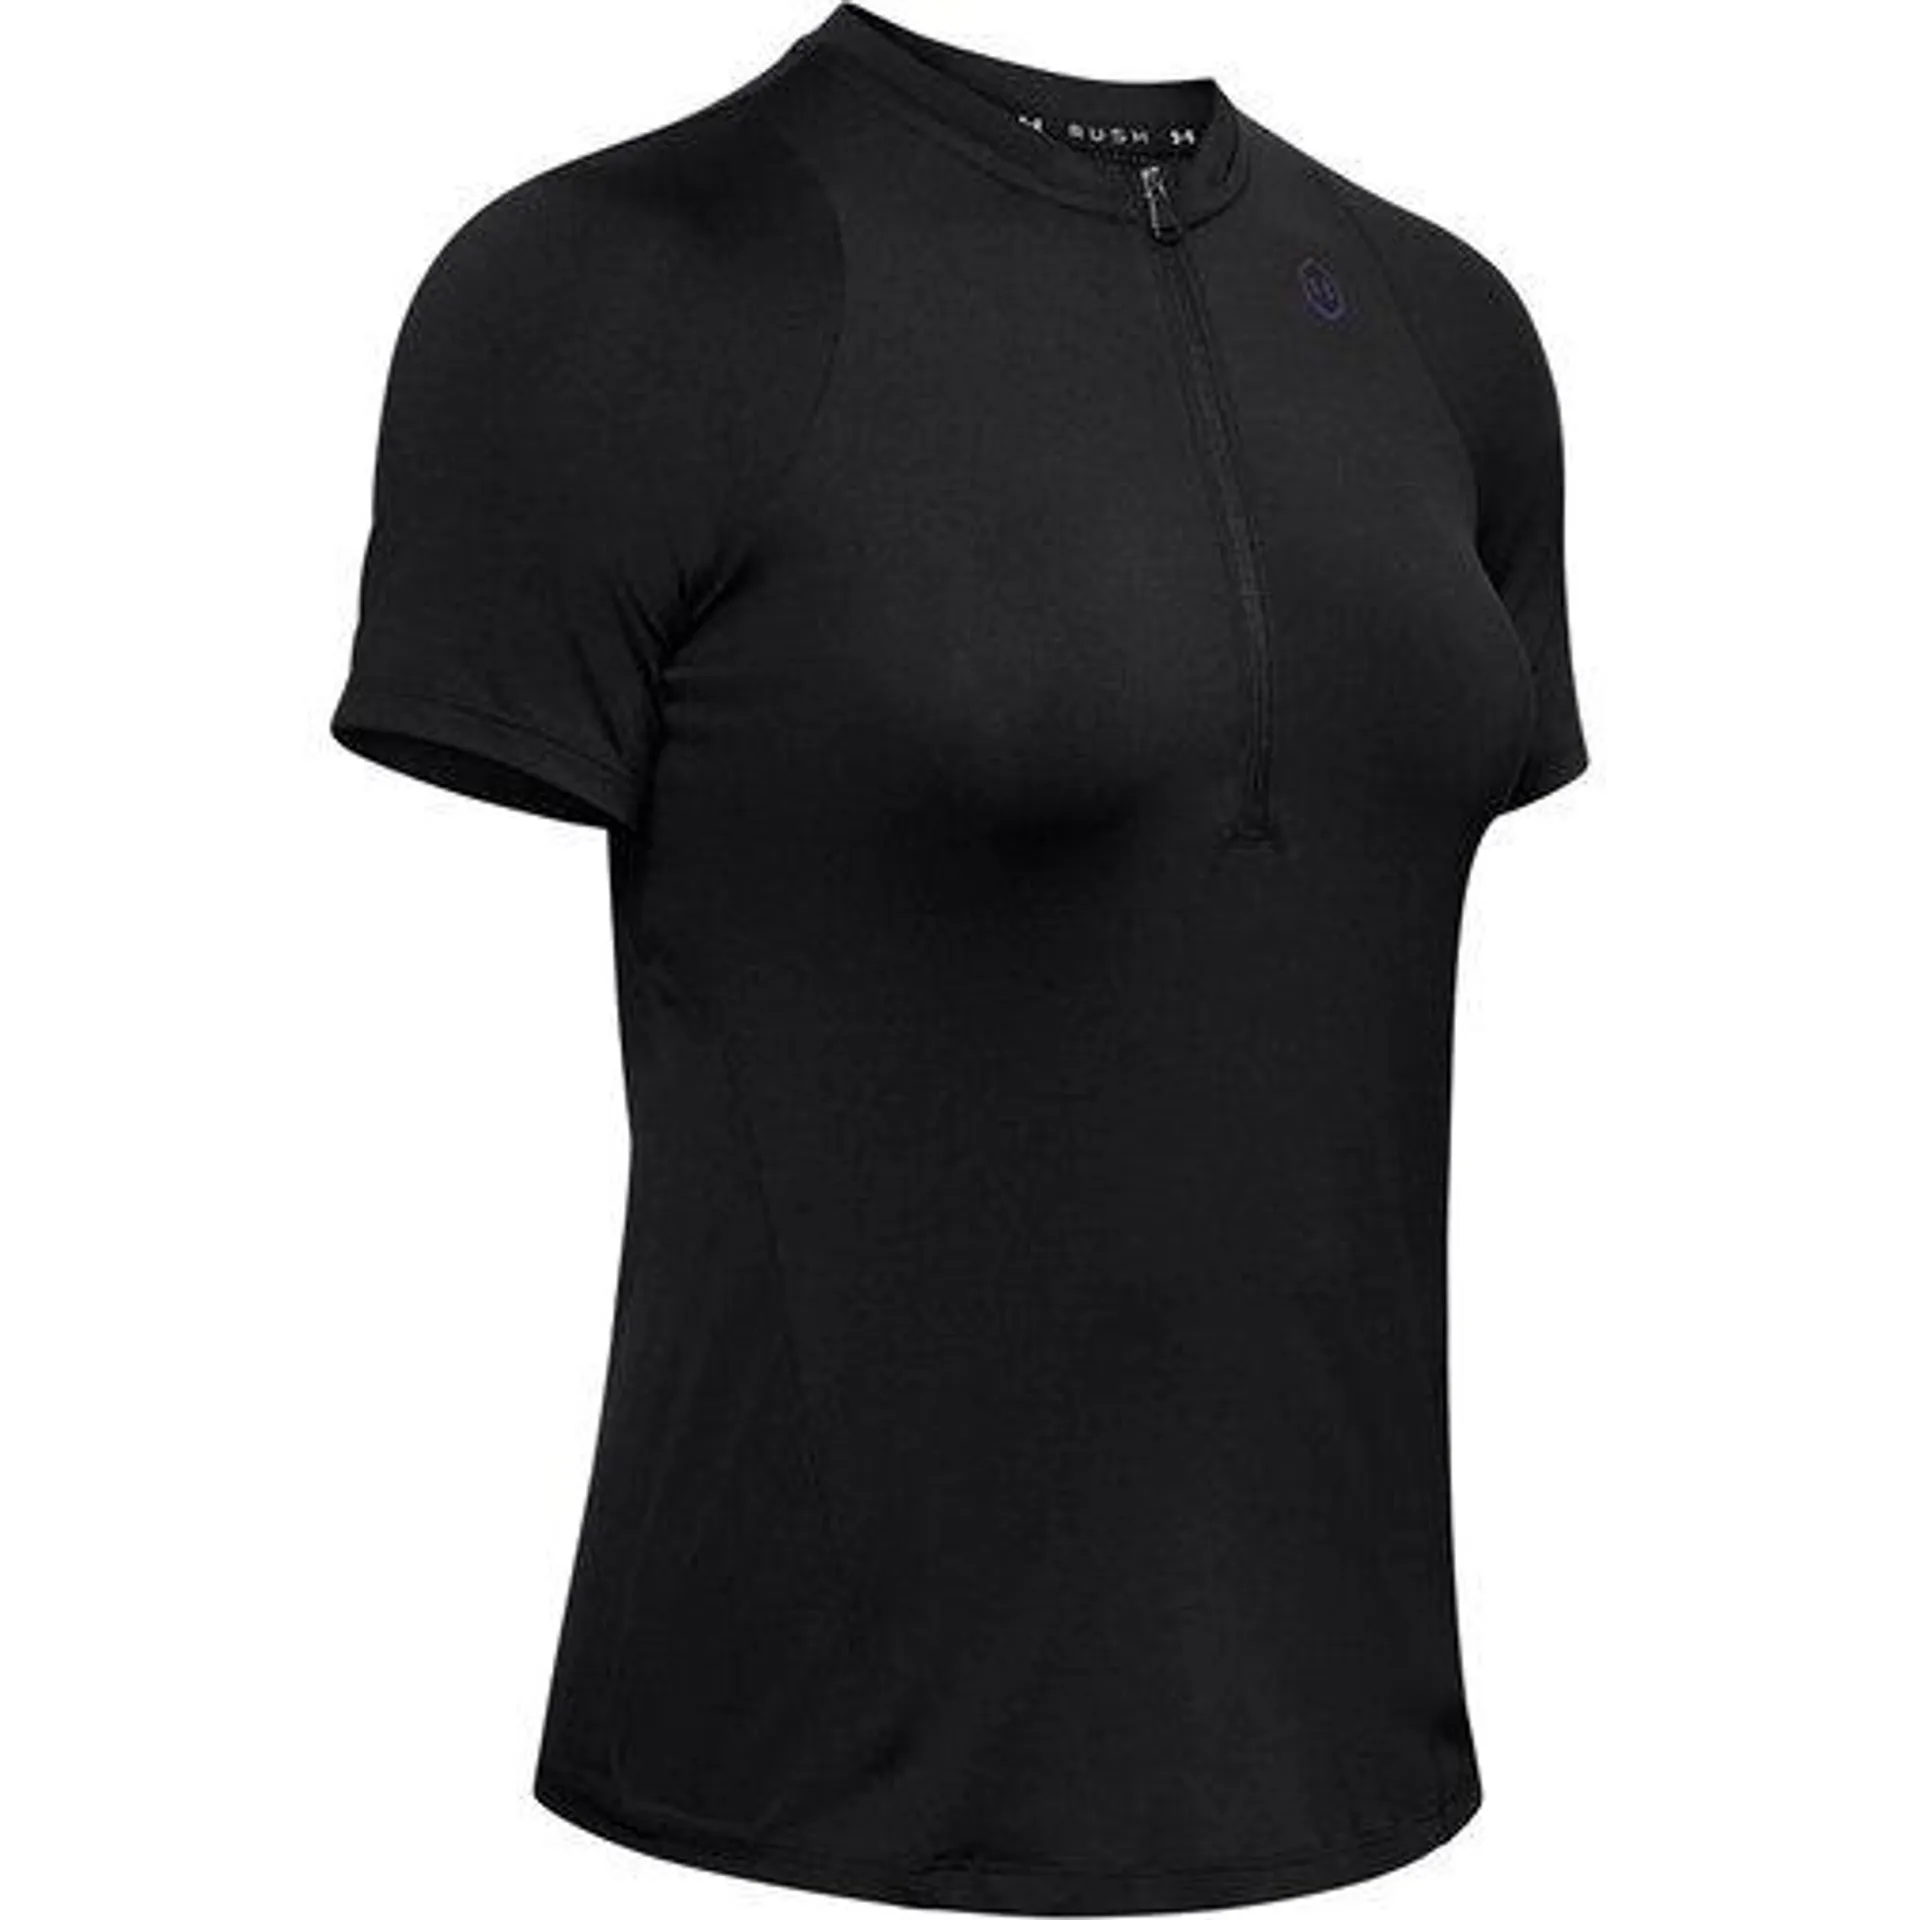 Under Armour Vent Top